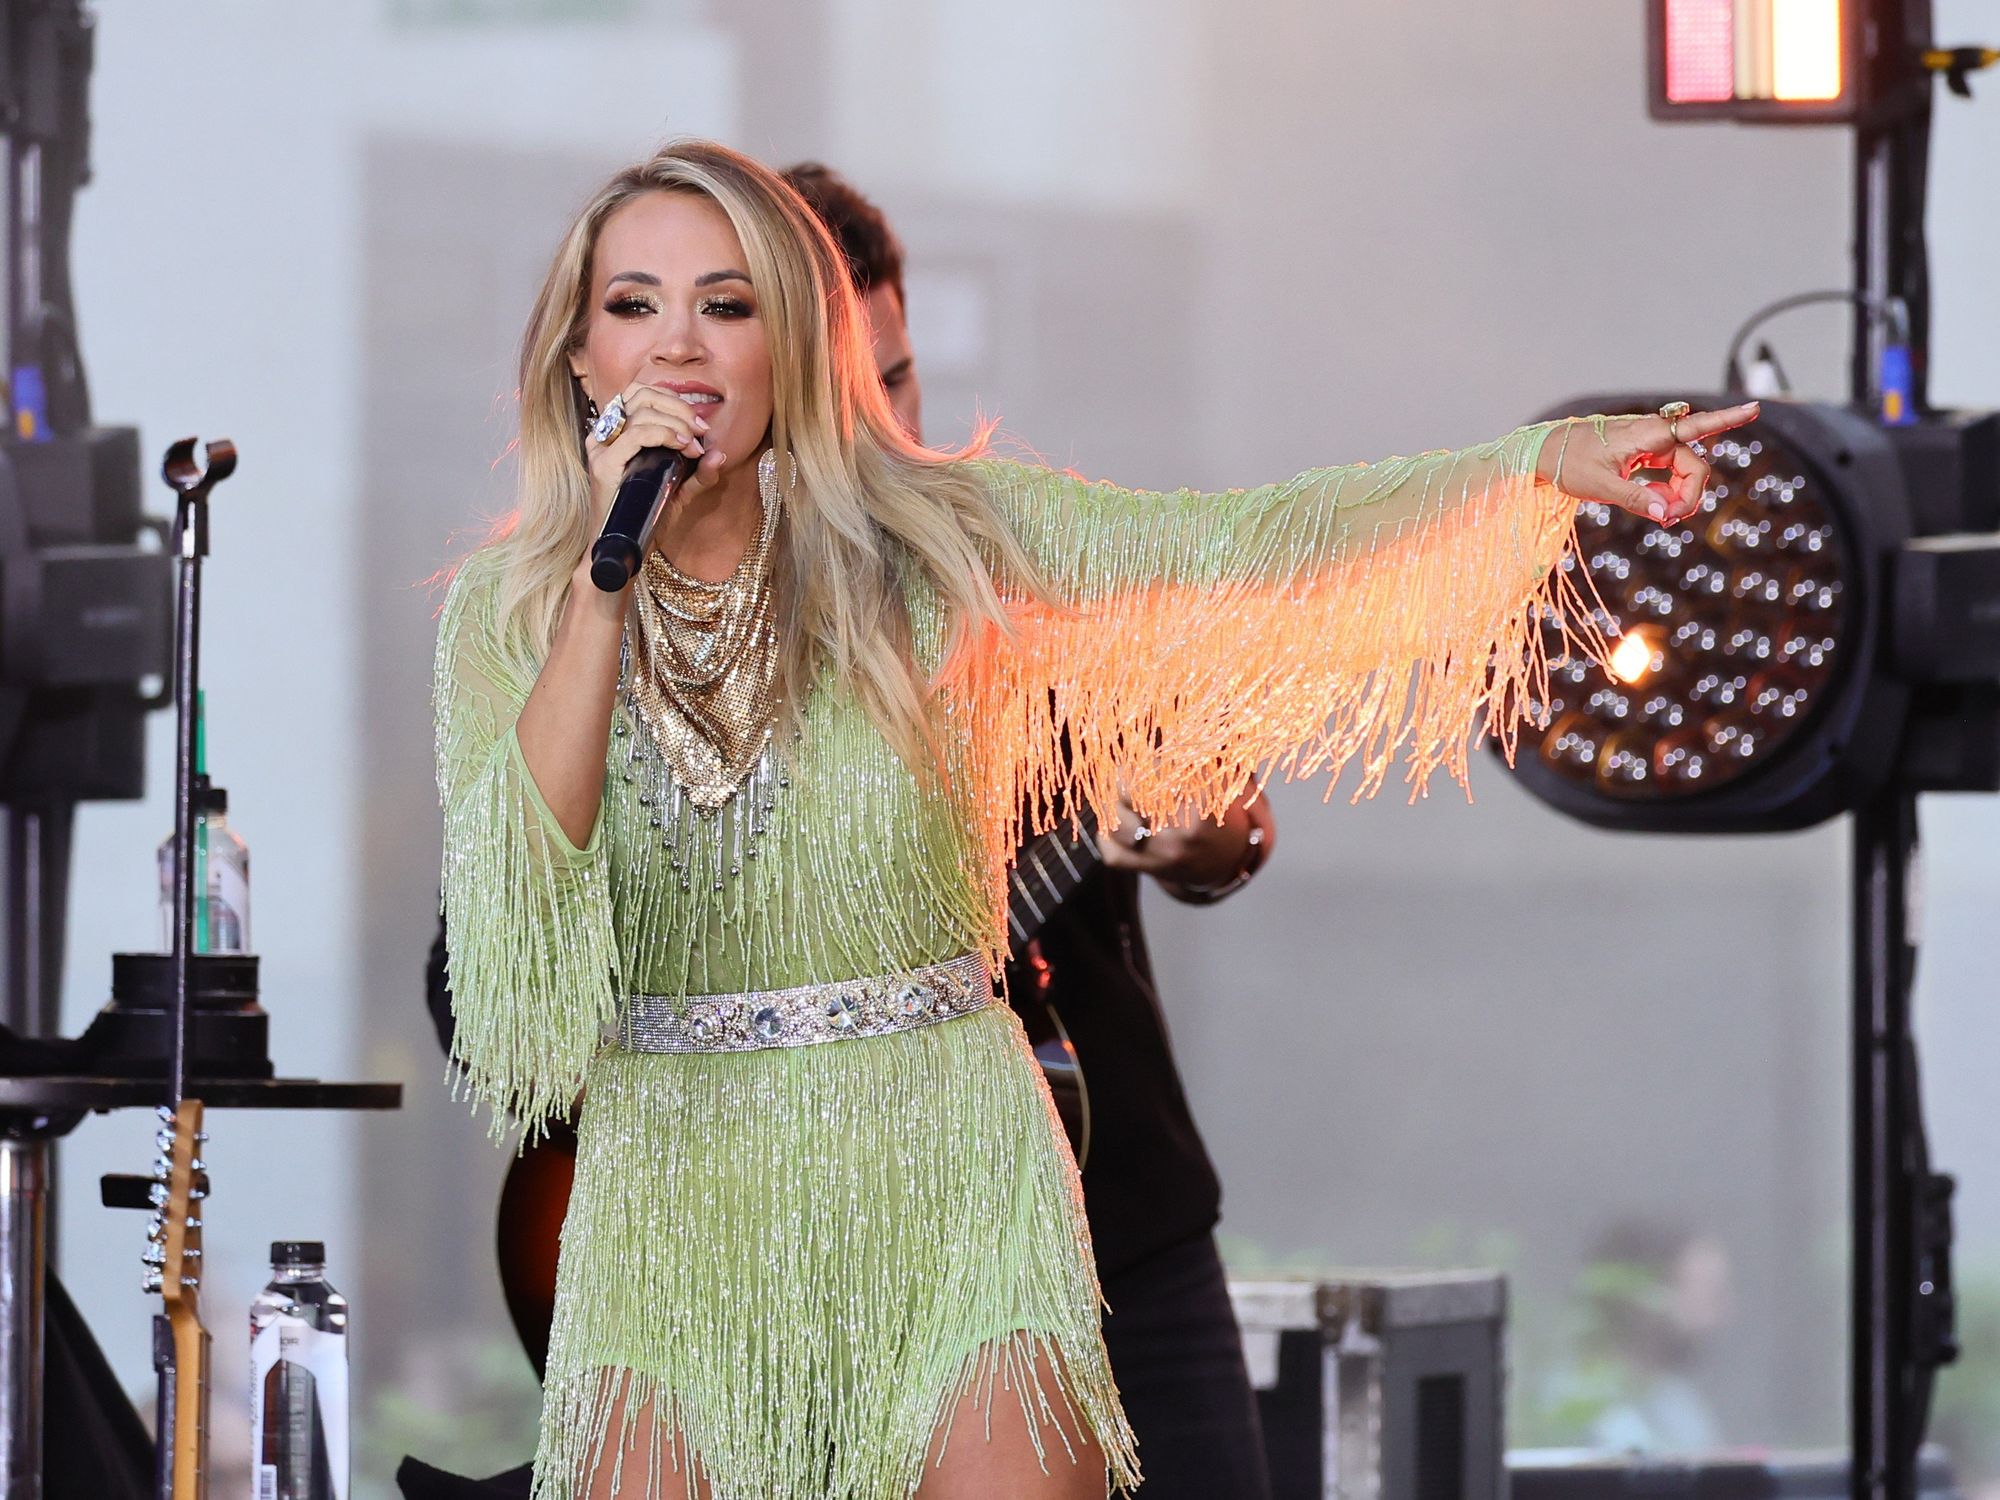 Carrie Underwood's Dress At The Grammys Was A Total Light Show (PHOTOS)